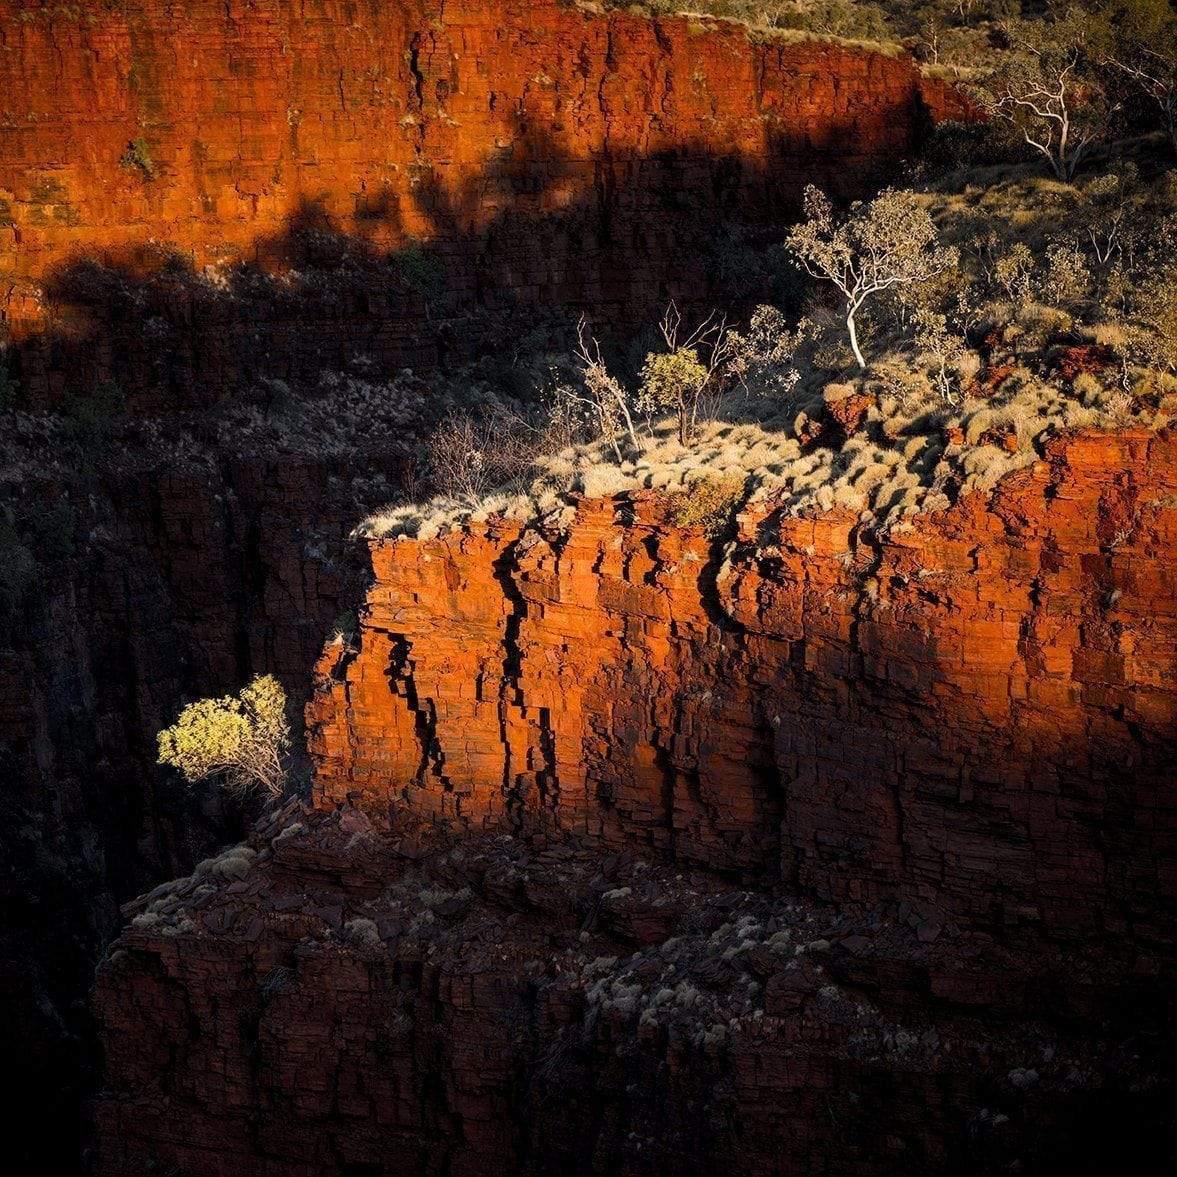 A drone view of an orangish-bricked mountain having some greenery over, with partially hitting sunlight, Oxers Sunset - Karijini, The Pilbara